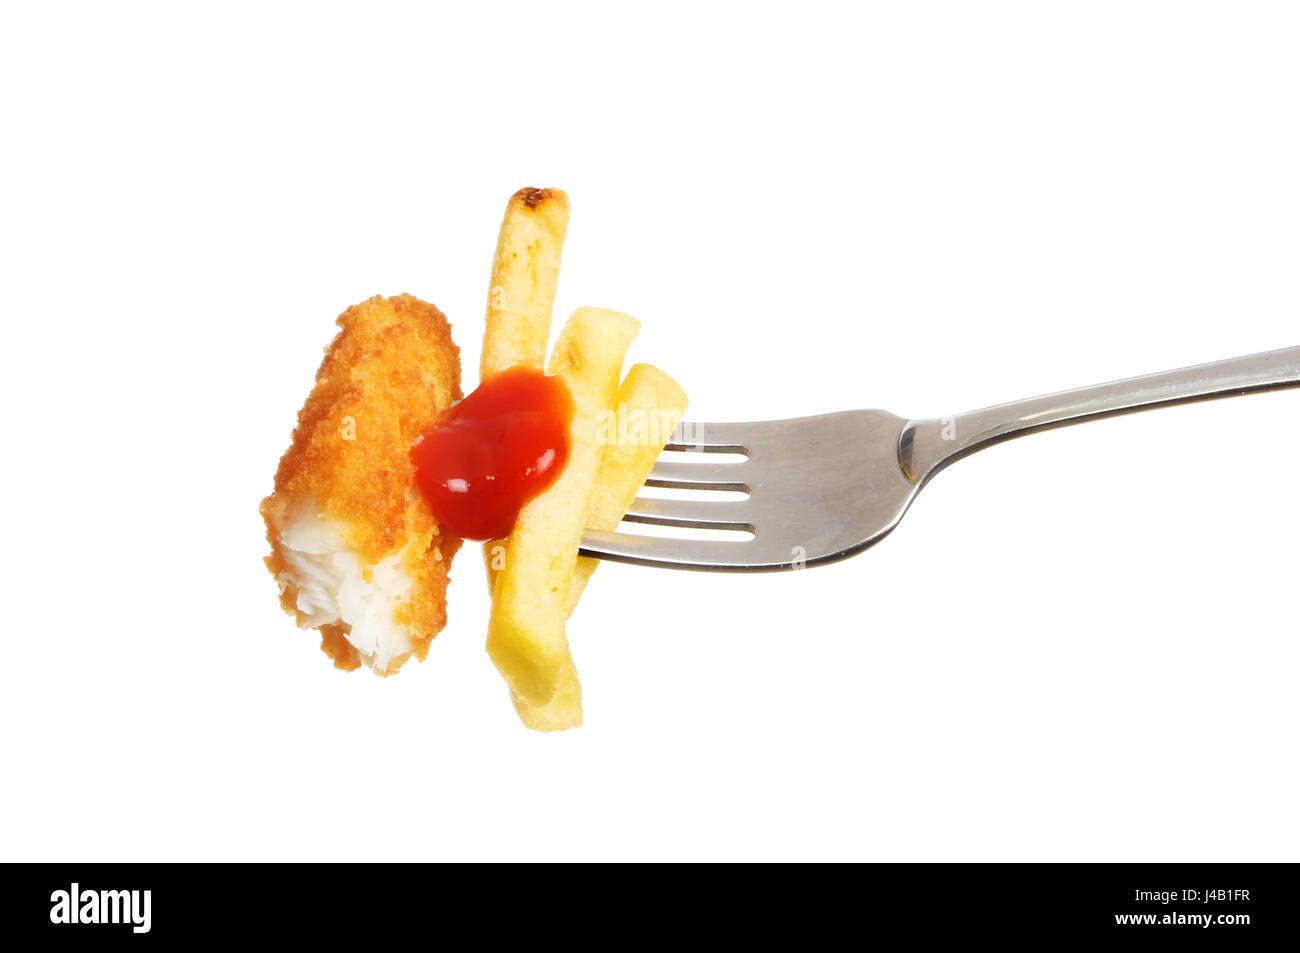 Fish finger, French fries with tomato ketchup on a fork isolated against white Stock Photo